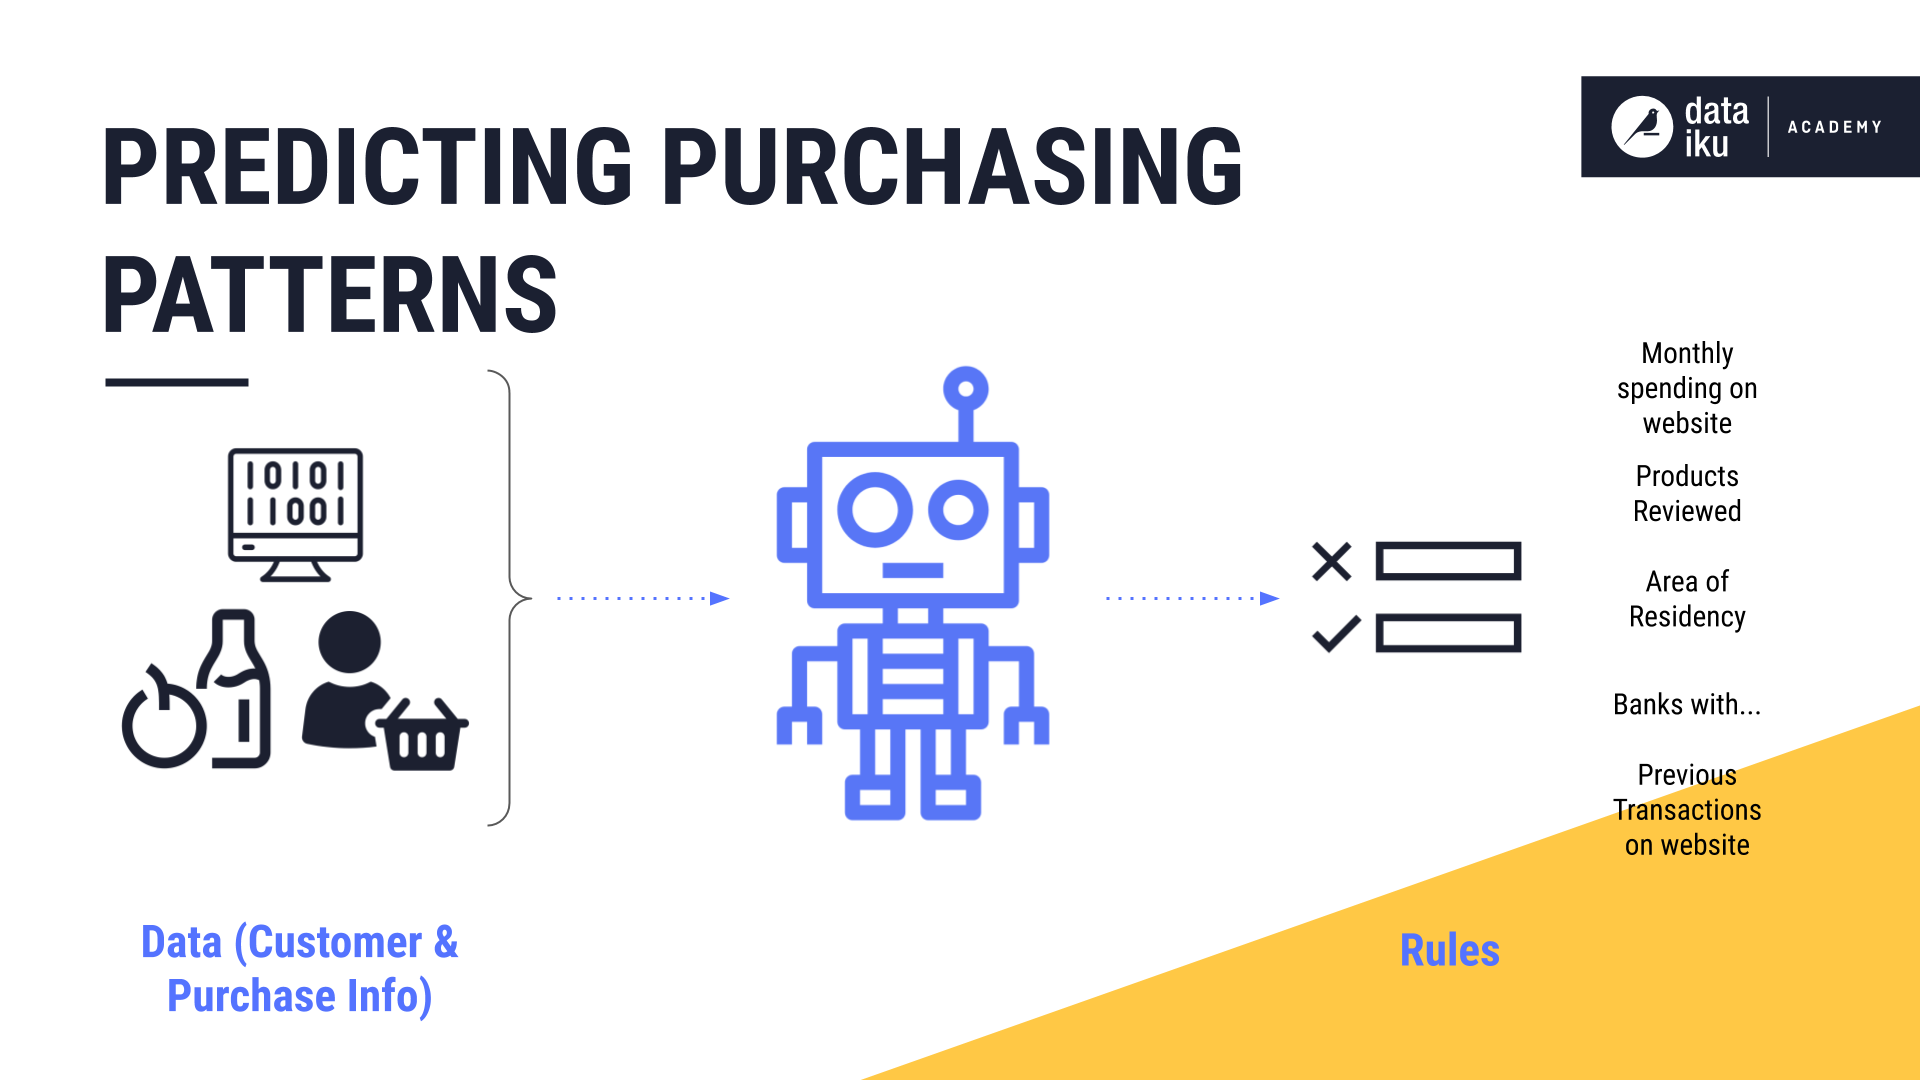 Predicting purchase patterns use case.